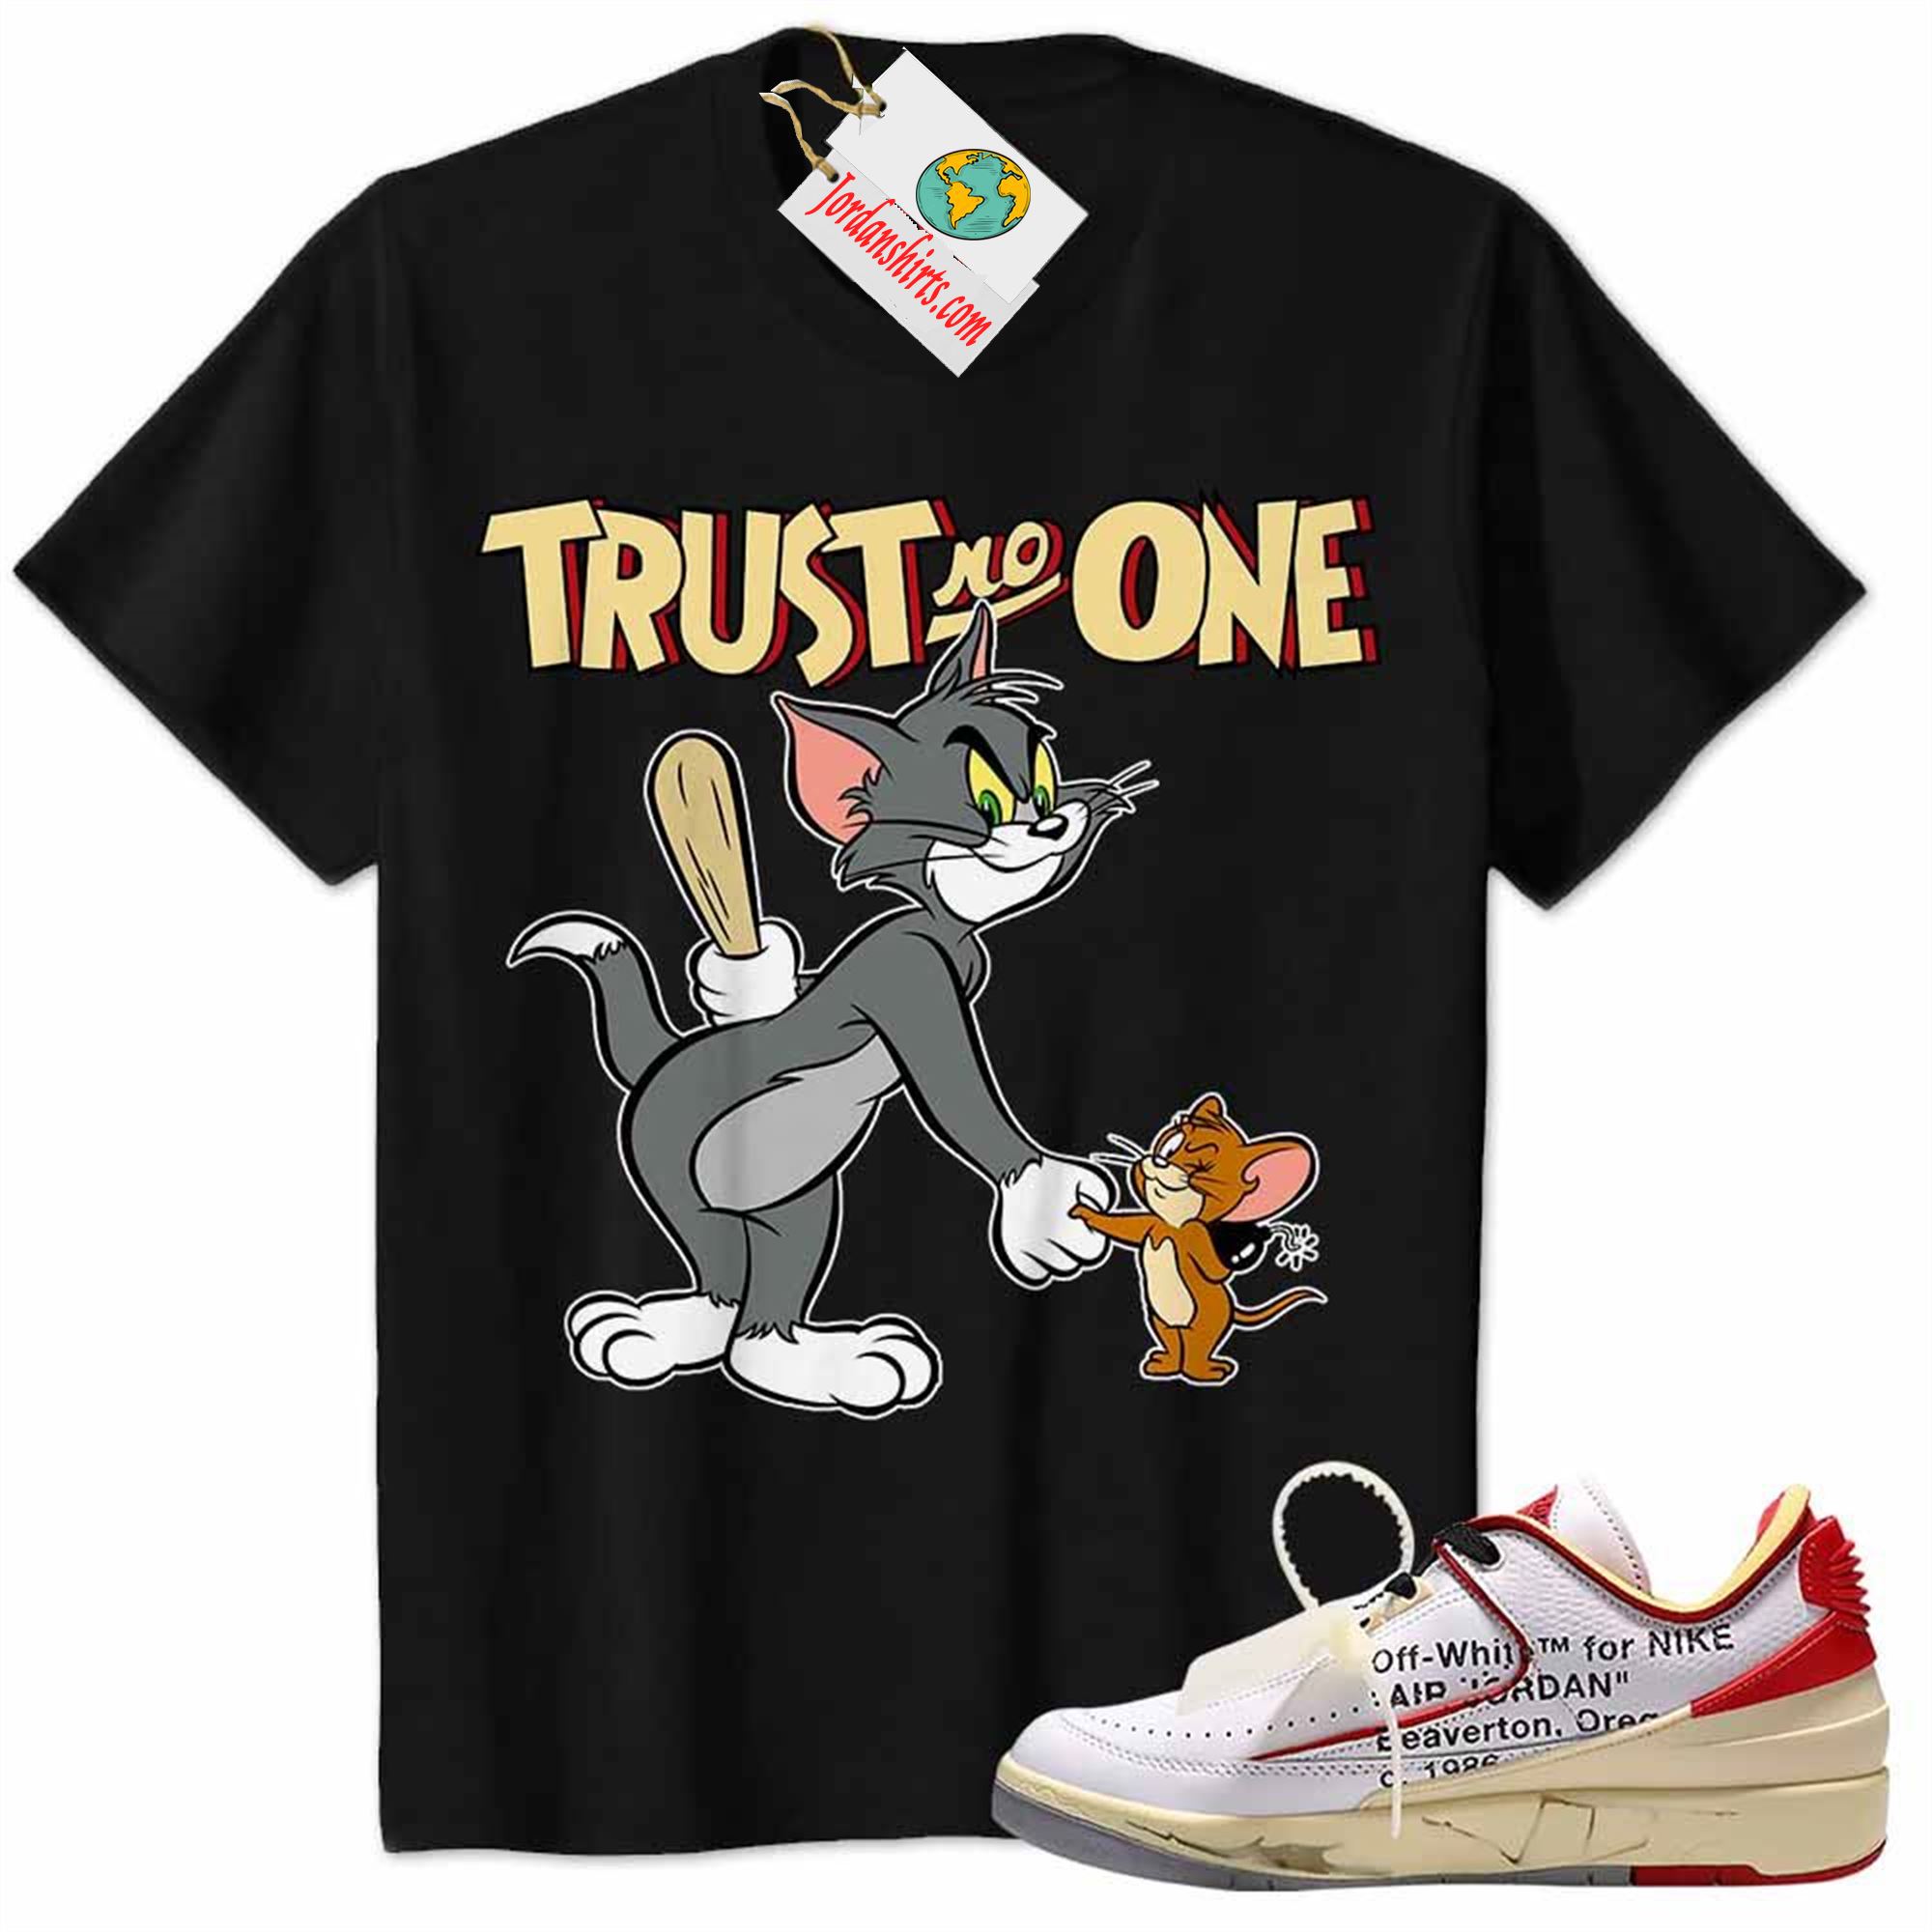 Jordan 2 Shirt, Tom And Jerry Trust No One With Bomb Black Air Jordan 2 Low White Red Off-white 2s Size Up To 5xl